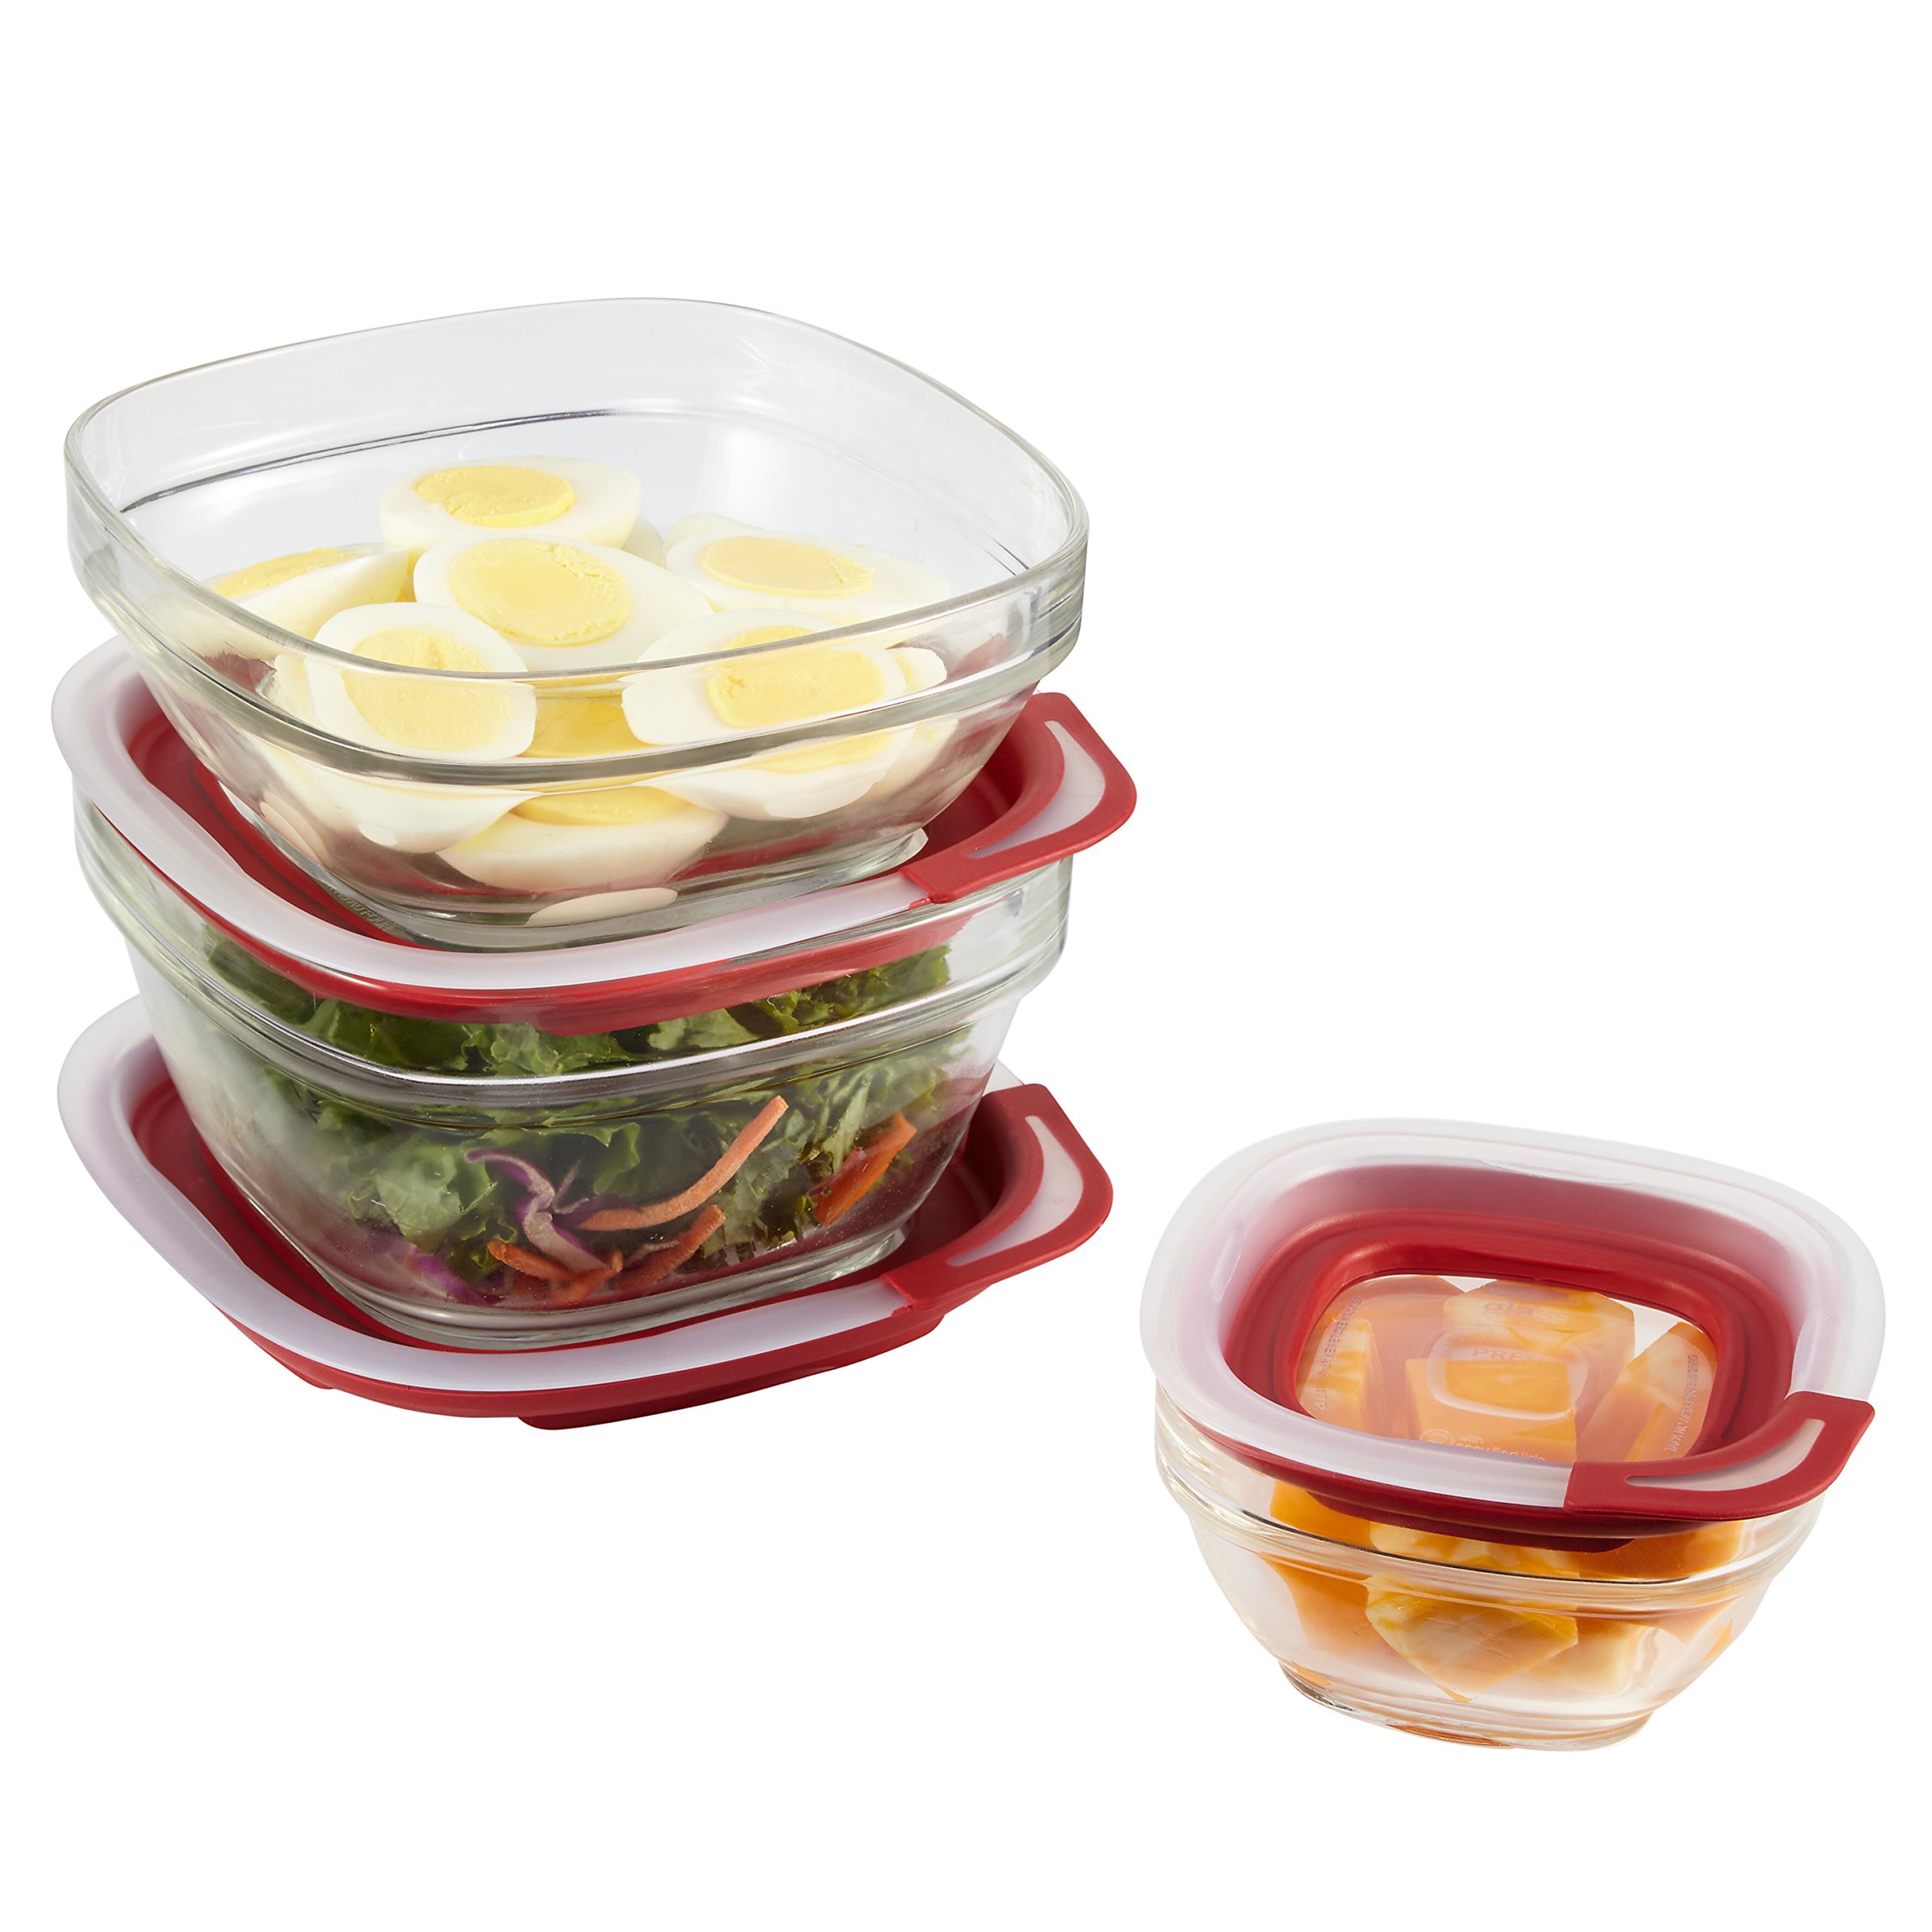  Utensilux Rubbermaid Storage Containers, Easy Find